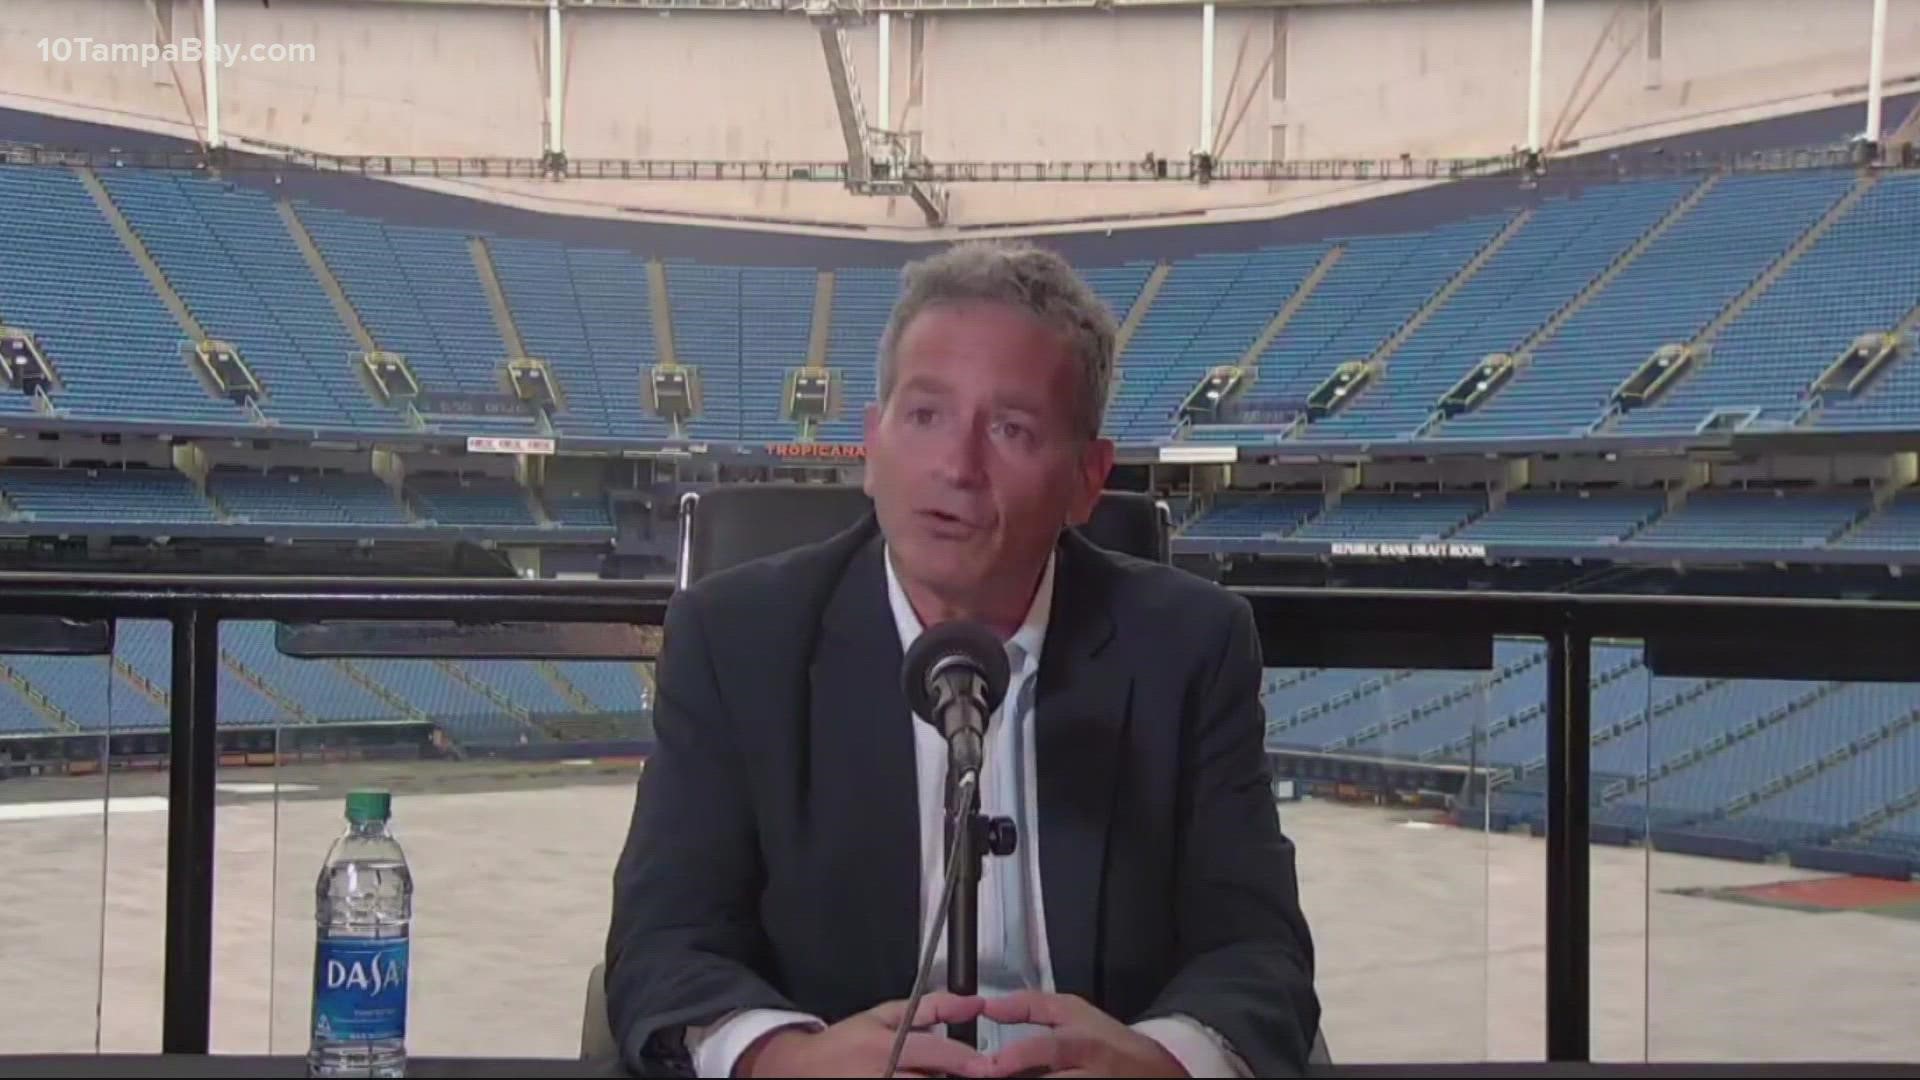 “Today’s news is flat out deflating," Rays' principal owner Stuart Sternberg said.